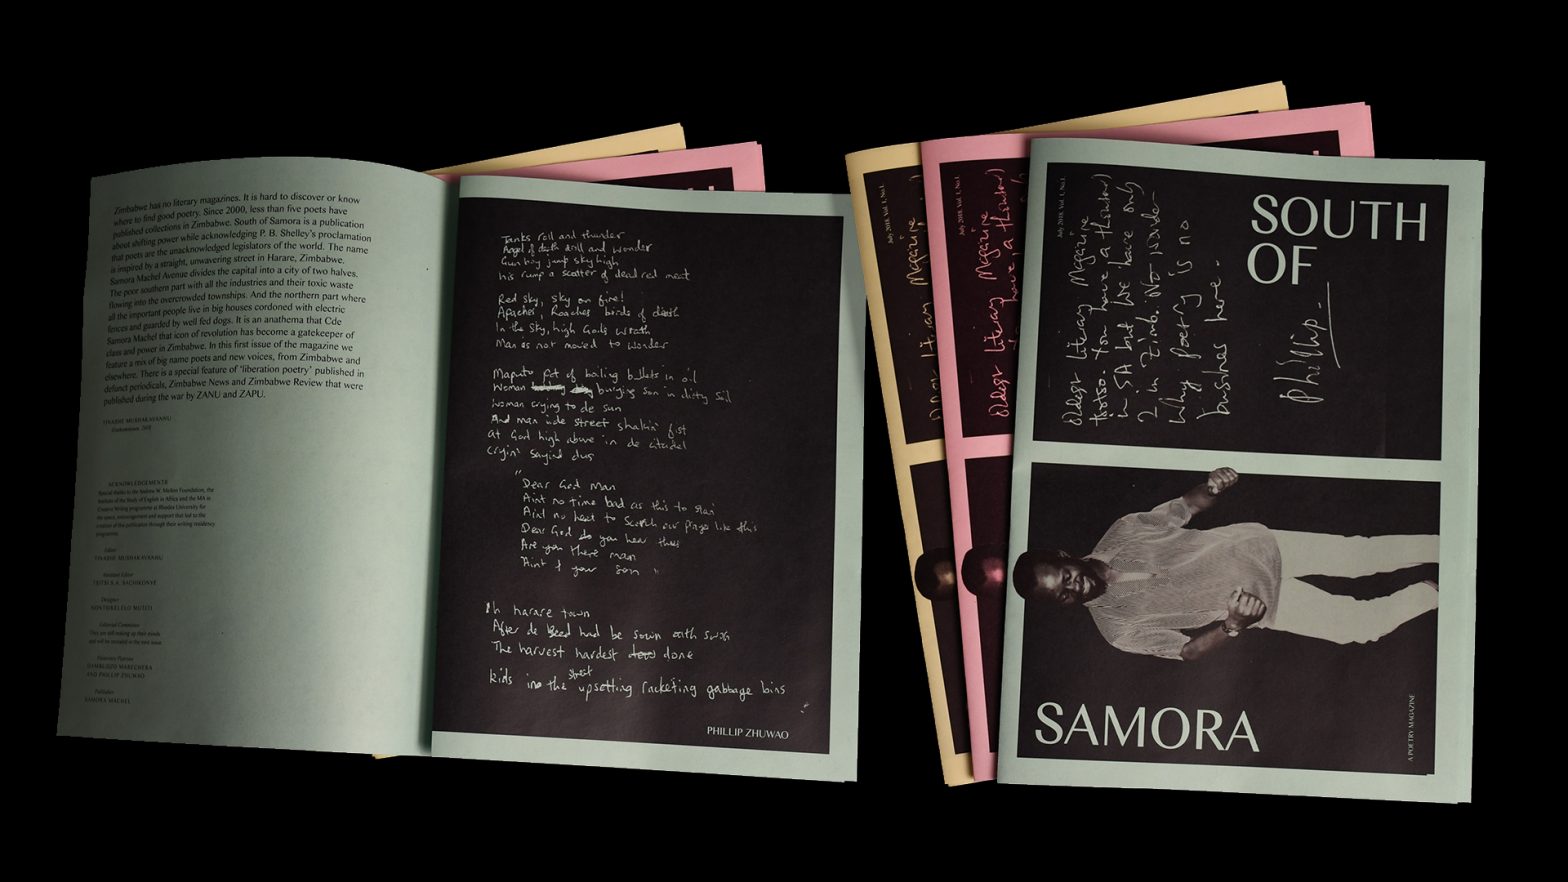 South of Samora: A Journal for Poetics, Vol. 1. Limited edition, laser printed, black on coloured copy paper, 8 pages, folded dimensions 8,25x 11,75 inches. Second printing. (Interior spread, left. Front cover, right )